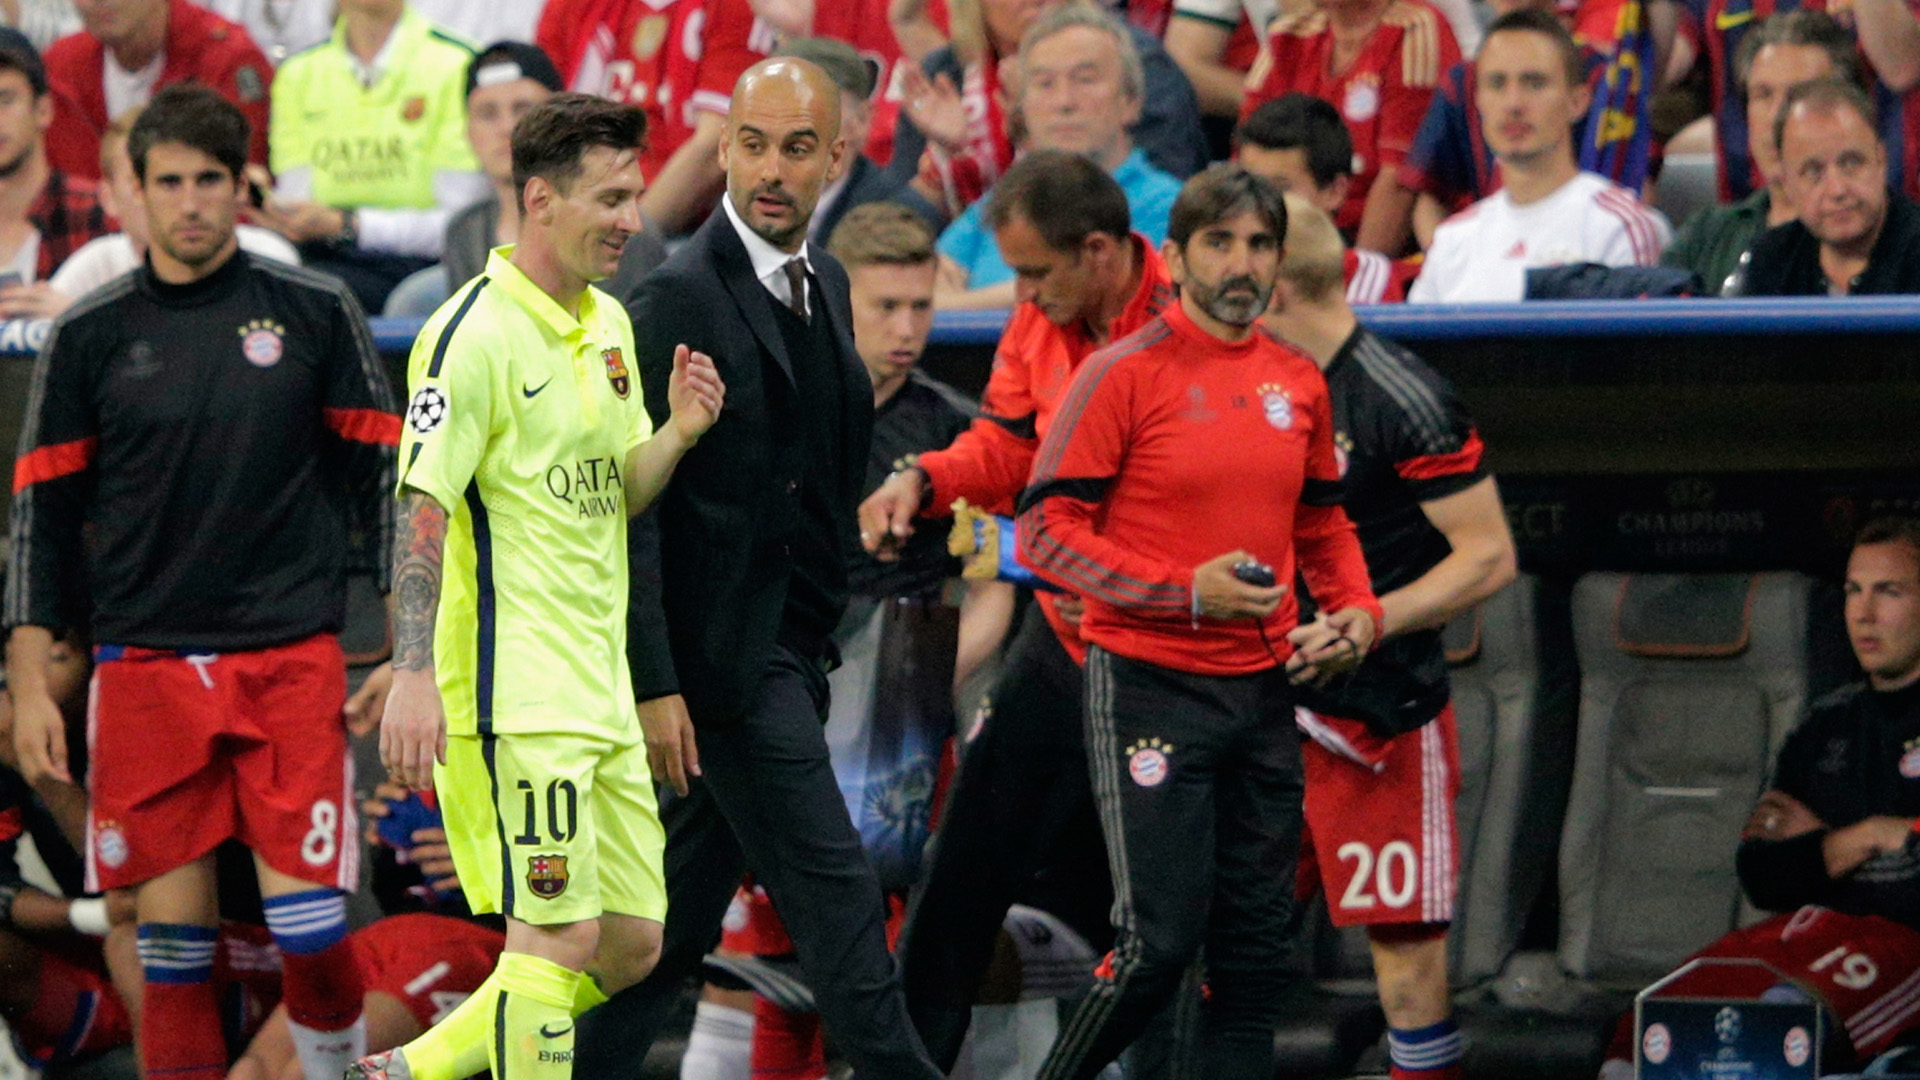 MUNICH, GERMANY - MAY 12:  Josep Guardiola head coach of Bayern Muenchen speaks to Lionel Messi of Barcelona at half time during the UEFA Champions League semi final second leg match between FC Bayern Muenchen and FC Barcelona at Allianz Arena on May 12, 2015 in Munich, Germany.  (Photo by Adam Pretty/Bongarts/Getty Images)